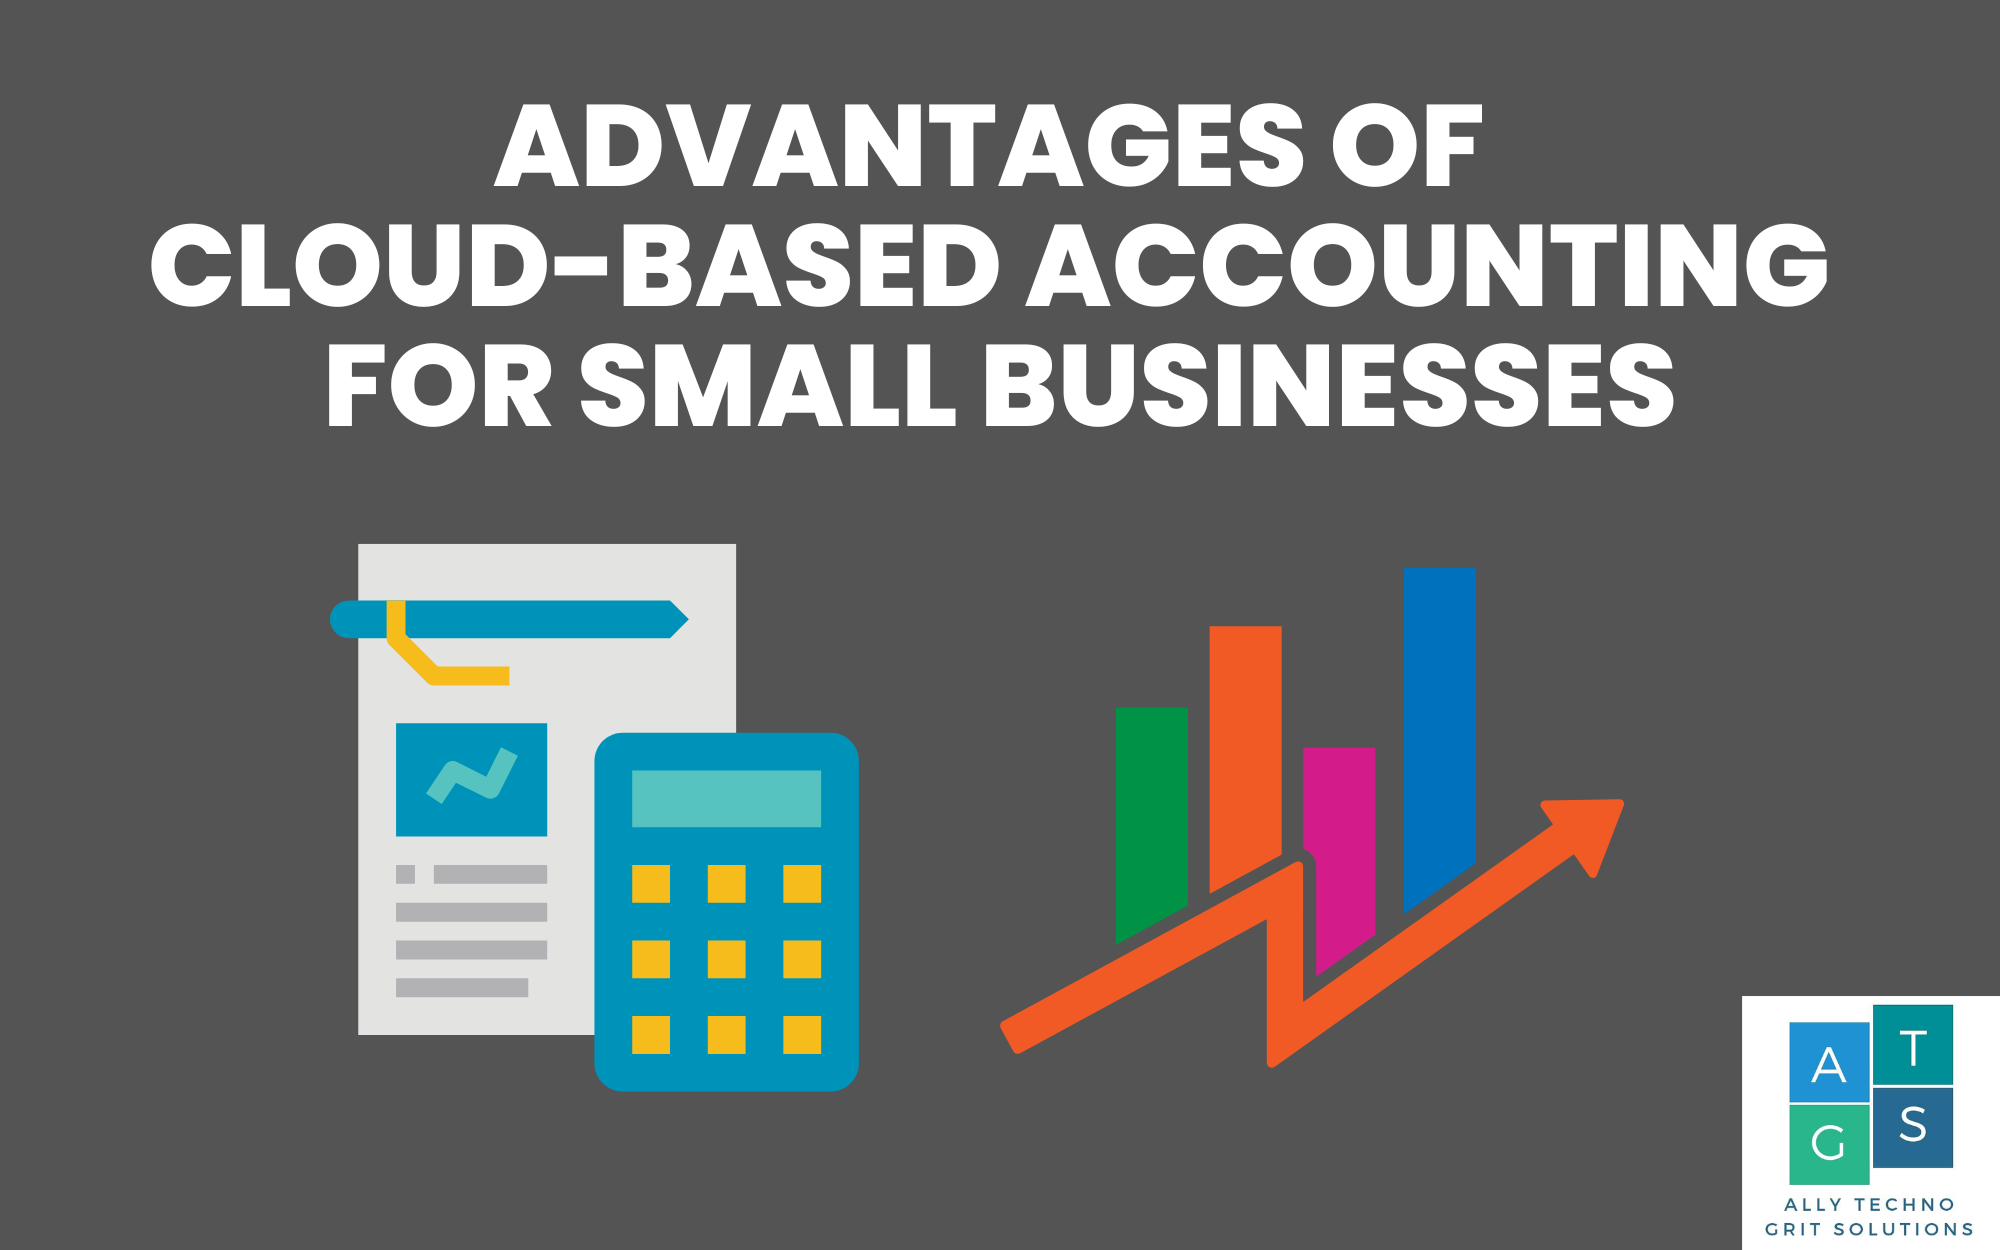 The Advantages of Cloud-Based Accounting for Small Businesses